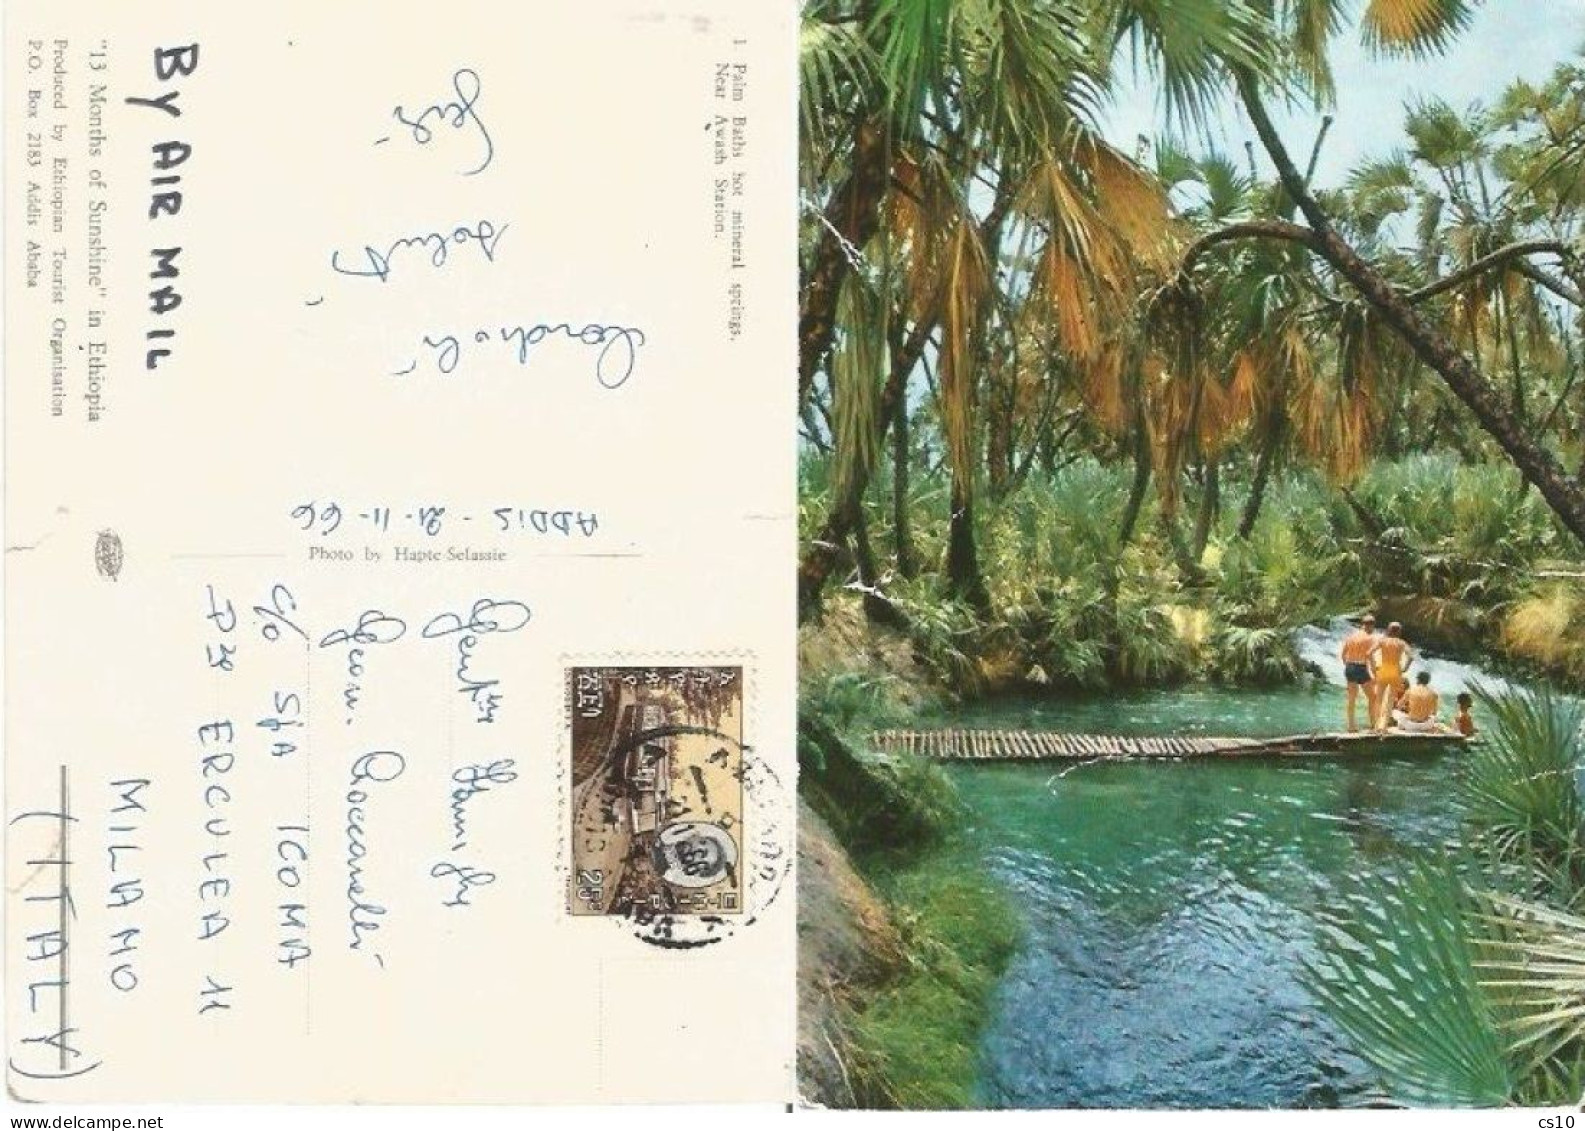 Ethiopia Palm Baths Hot Mineral Springs Awash Station Airmail Pcard 21nov1966 X Italy With 1 Stamp - Äthiopien